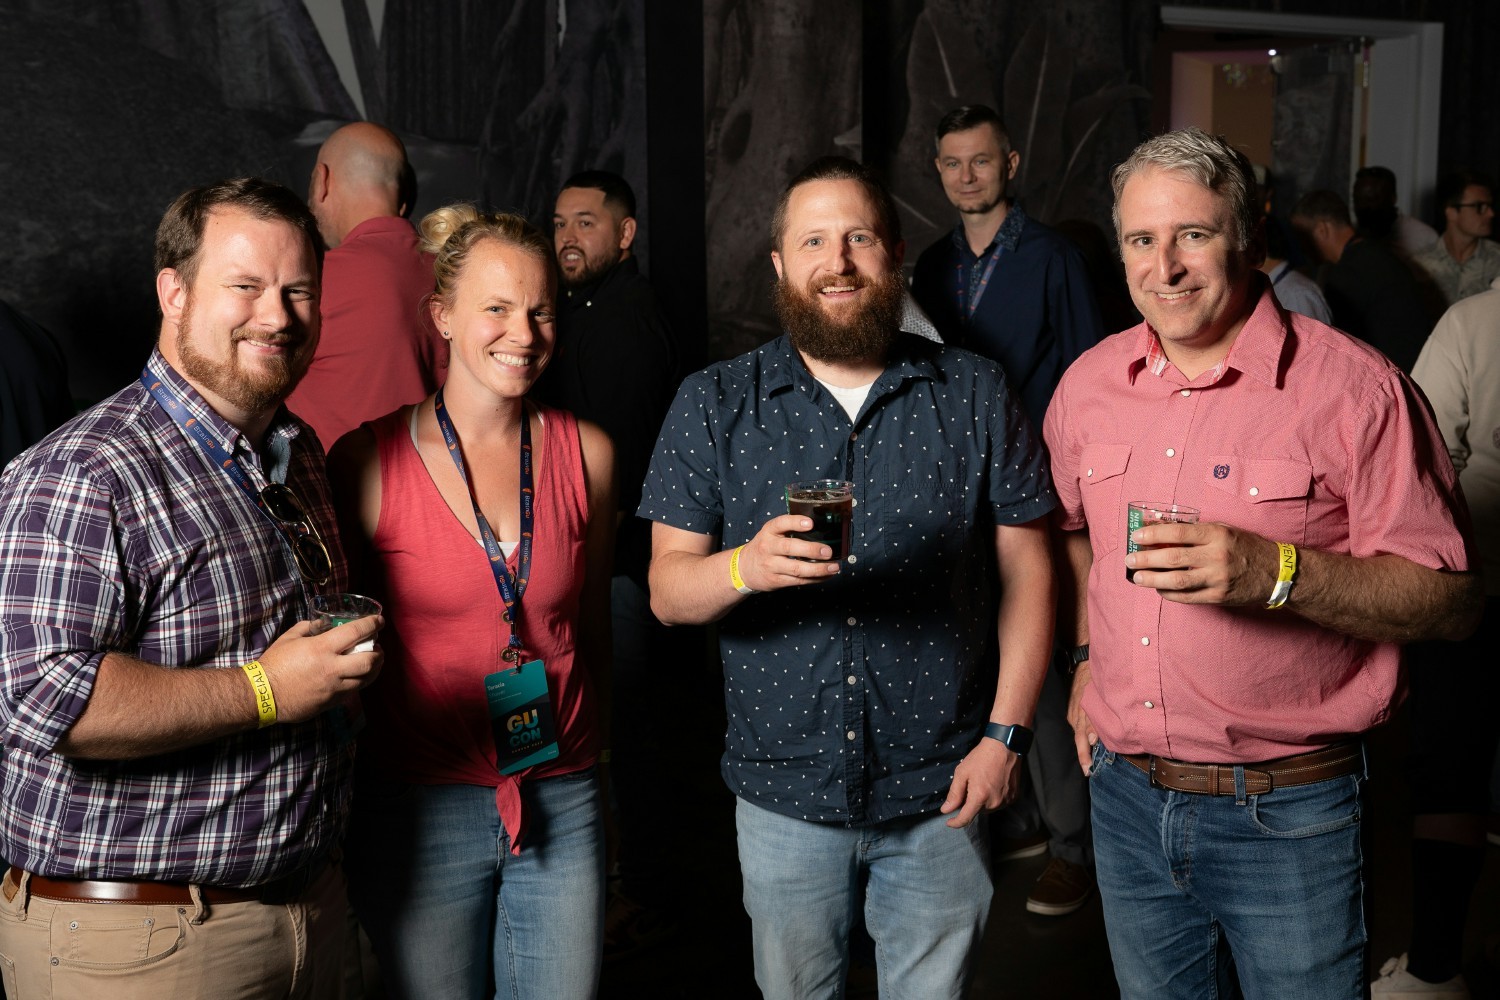 Members of the BrainGu team celebrating at Meow Wolf & connecting with each other at GuCon '23. BrainGu's annual retreat